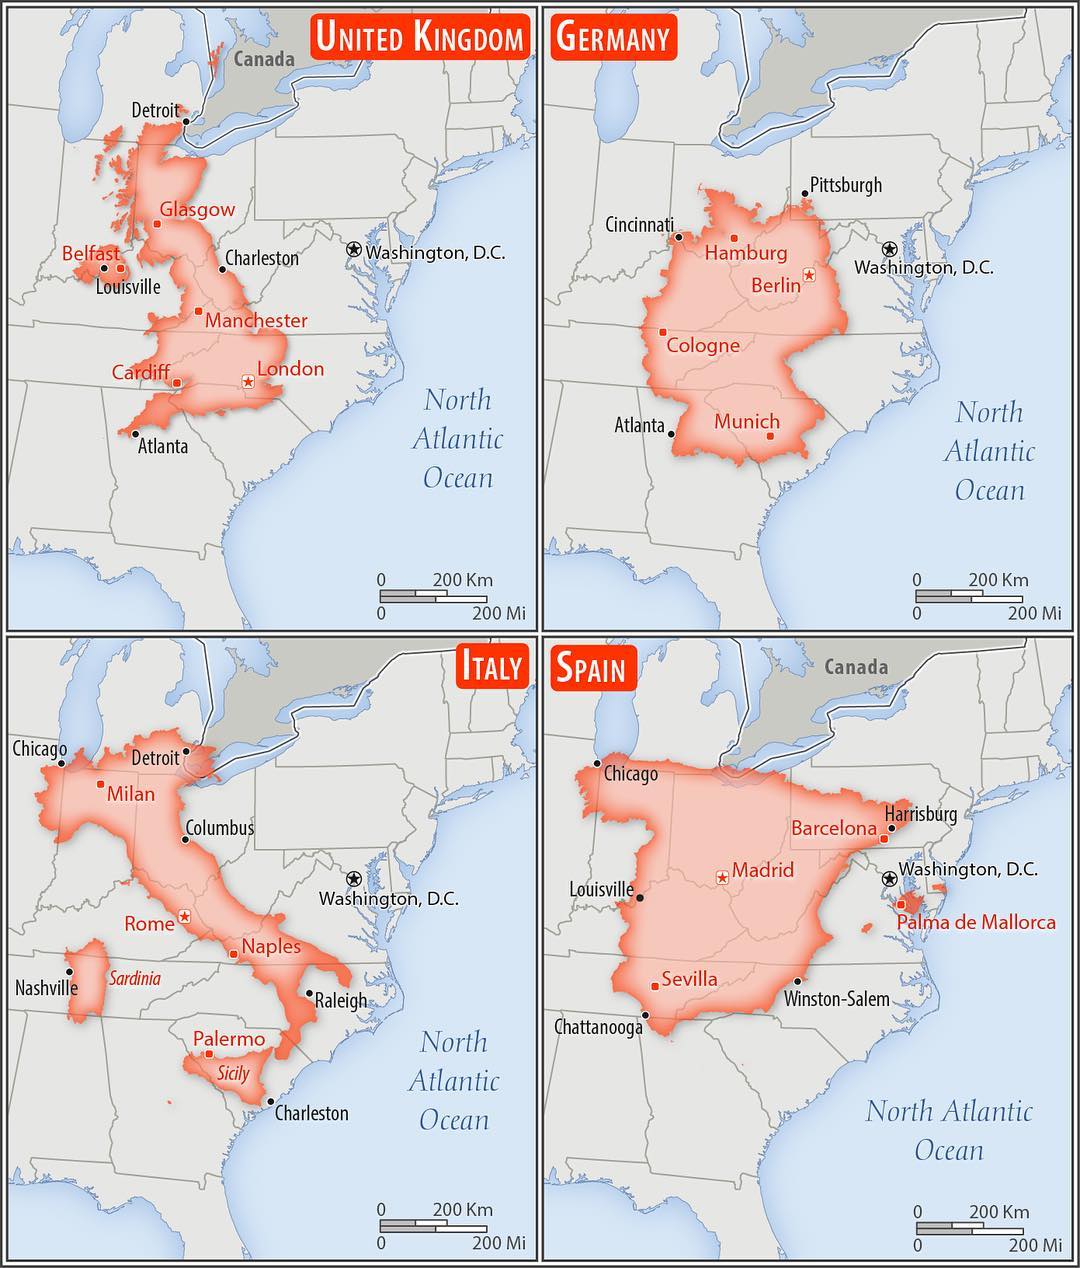 MapScaping on Twitter: "Size Comparison Between UK, Germany, Italy and